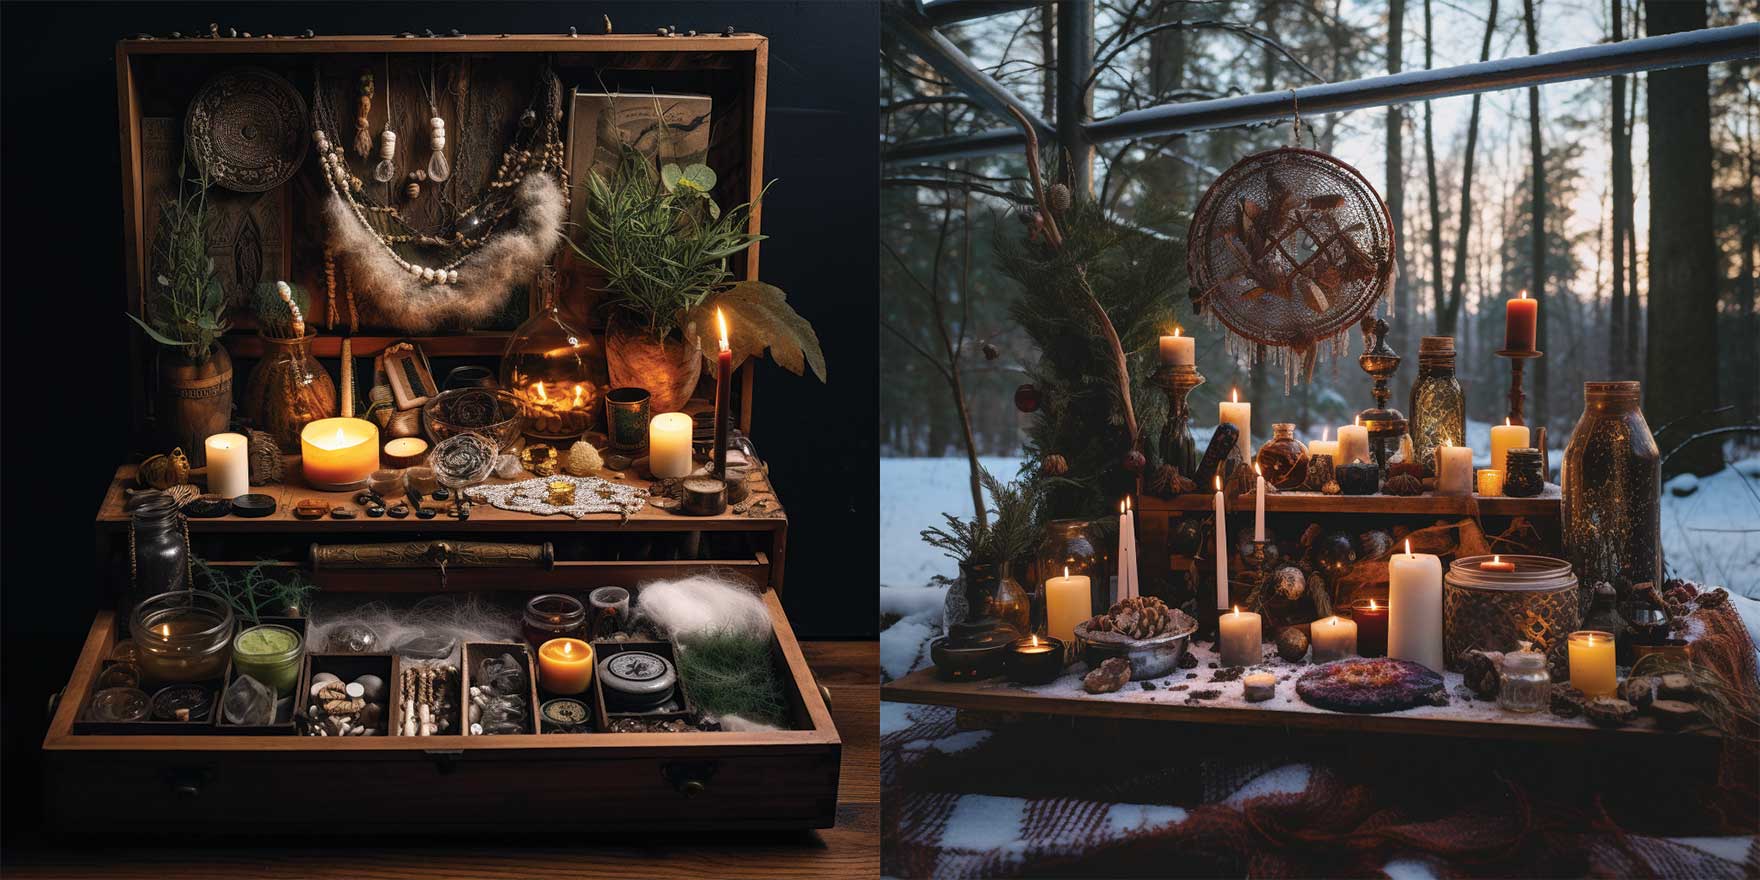 2 Yule altars with candles, crystals, and natural elements in a cozy setting.